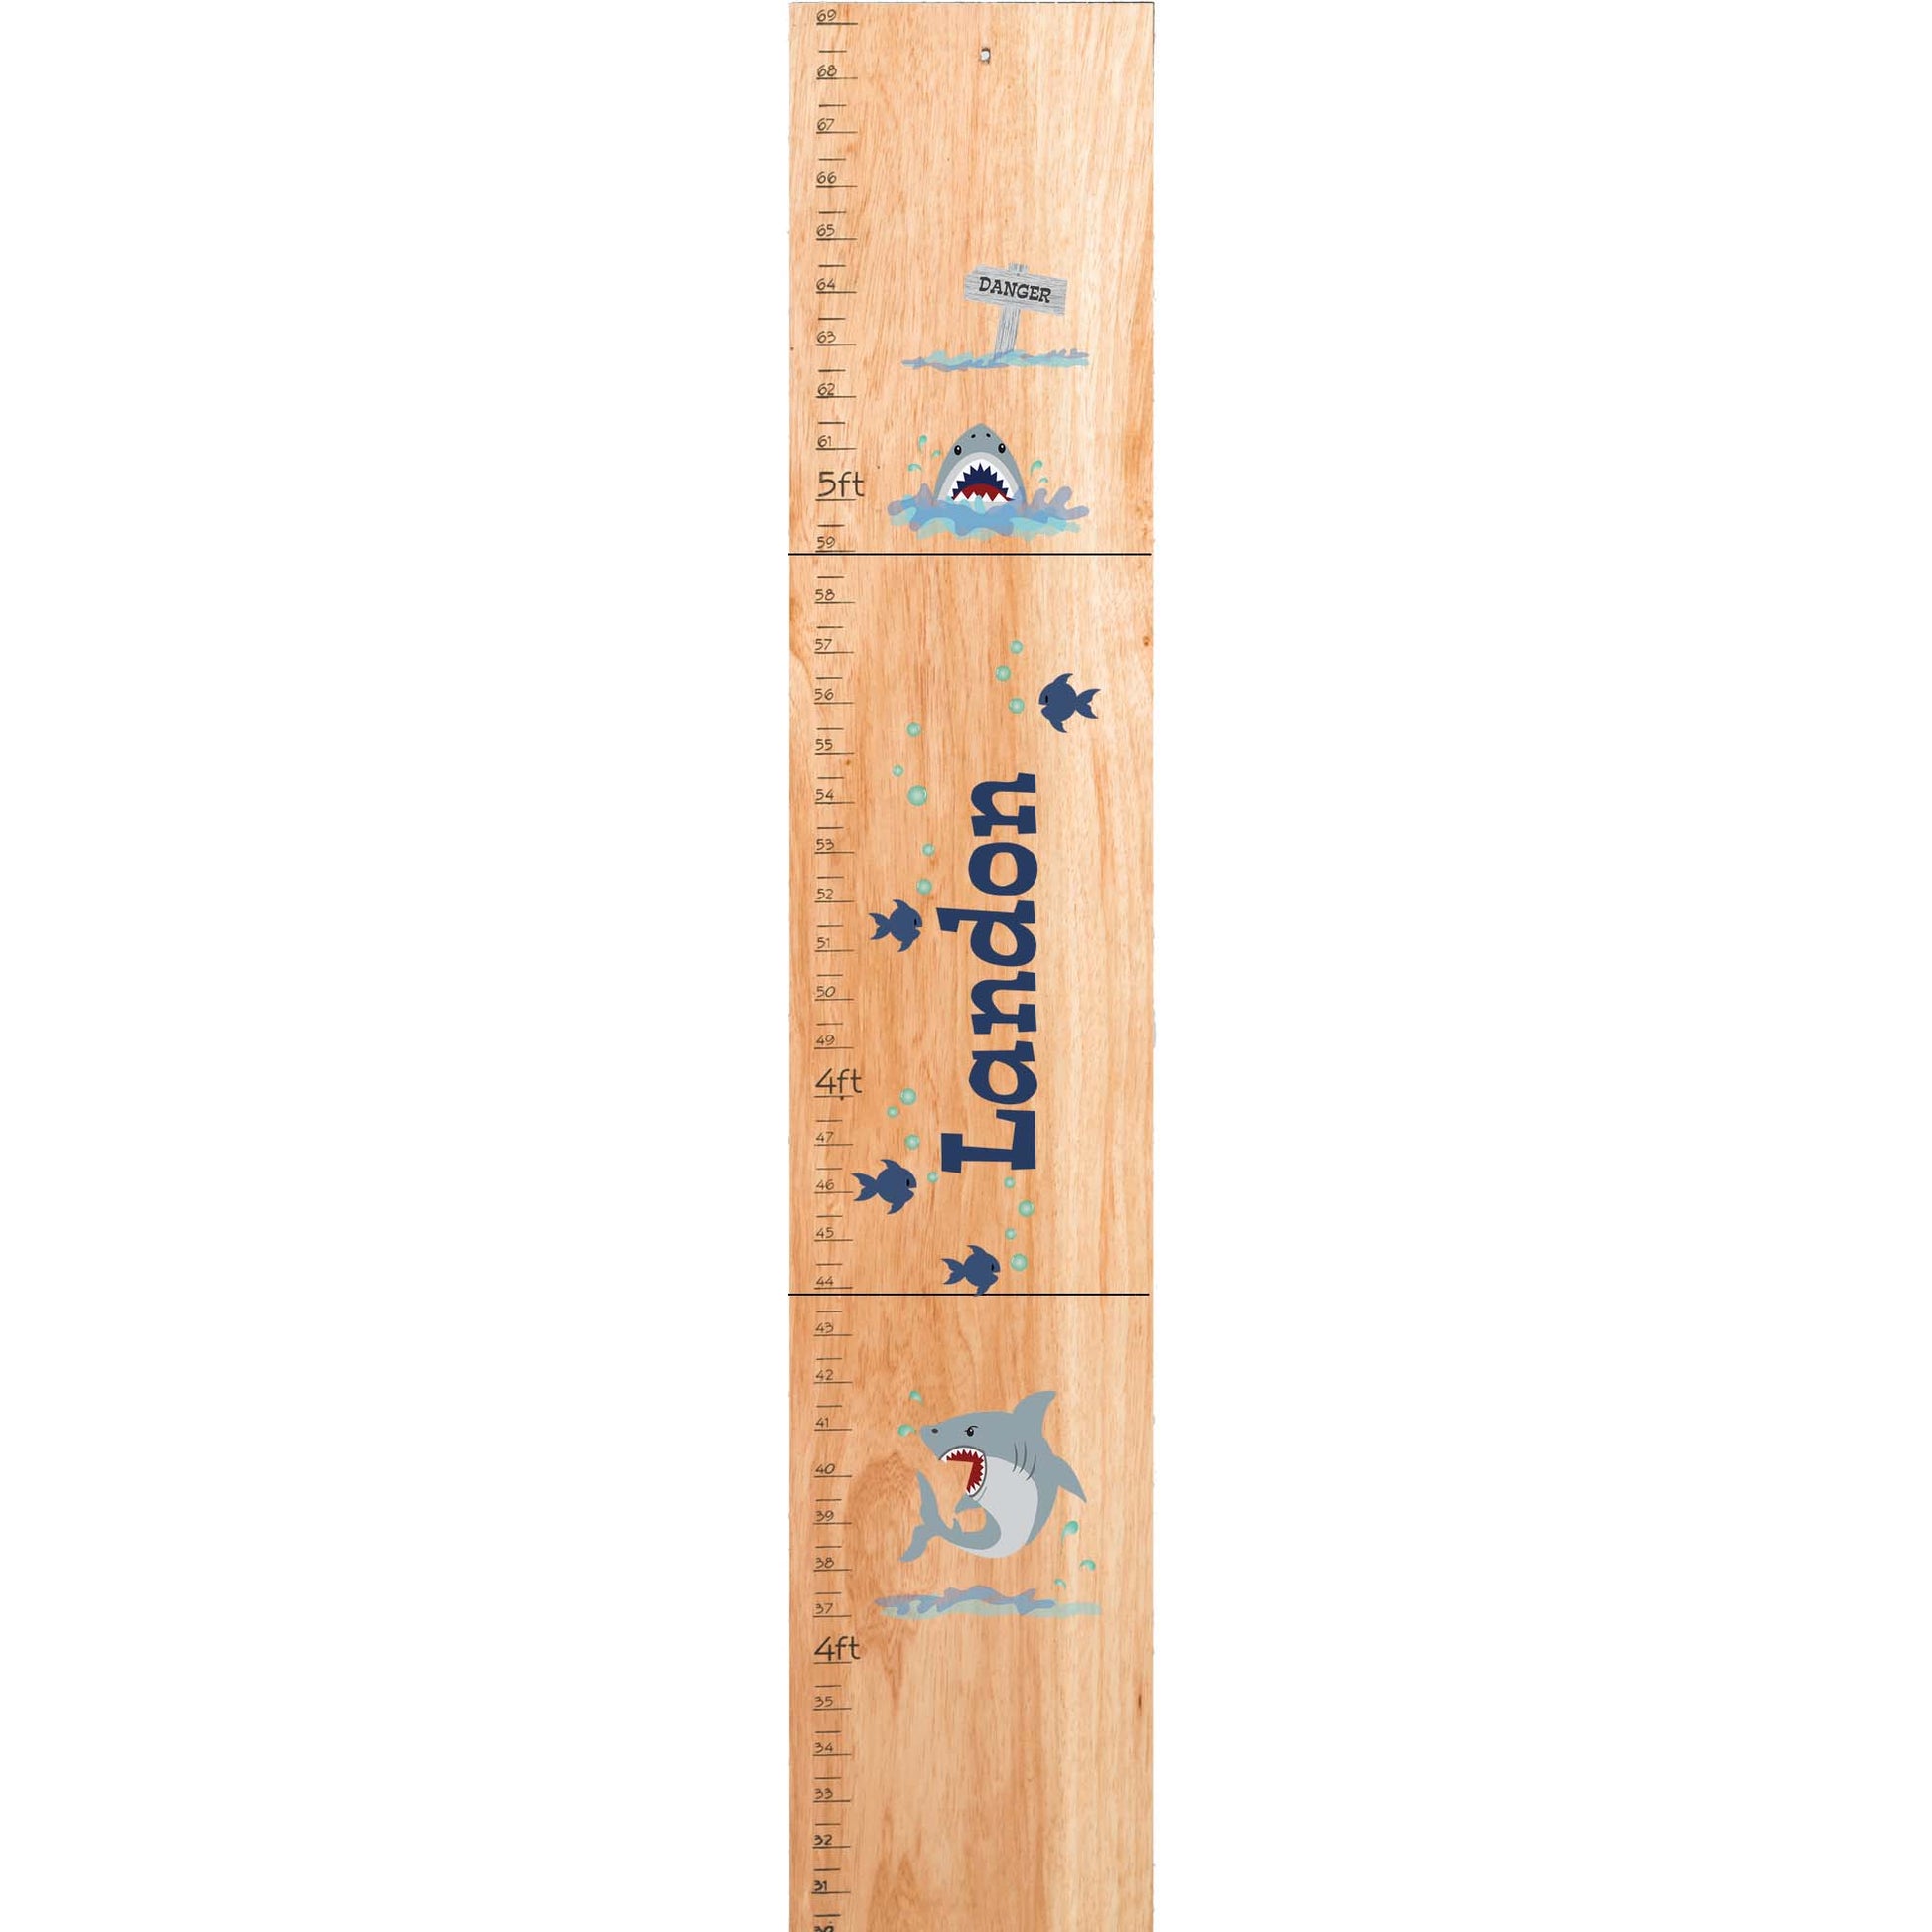 Personalized Natural Growth Chart With Giraffe Design